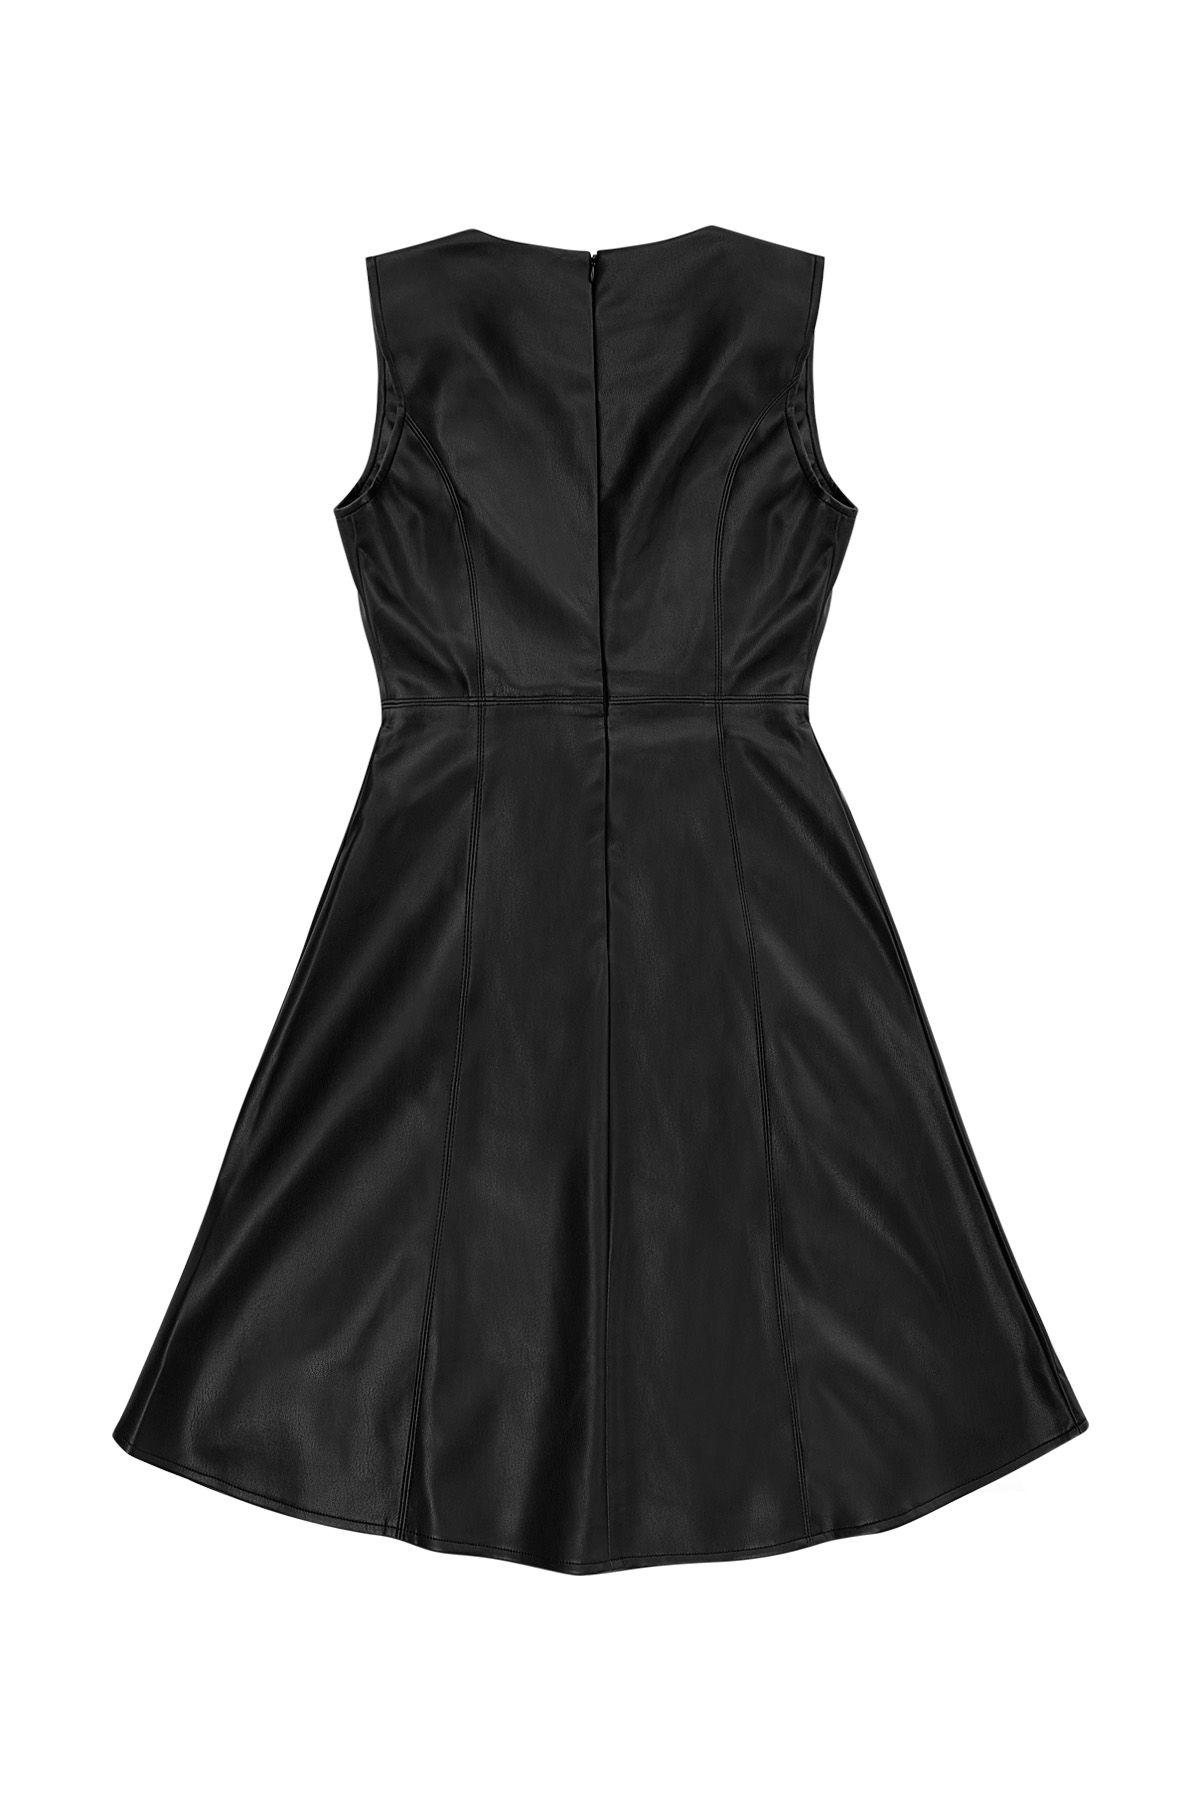 PU leather dress flared - black h5 Picture7